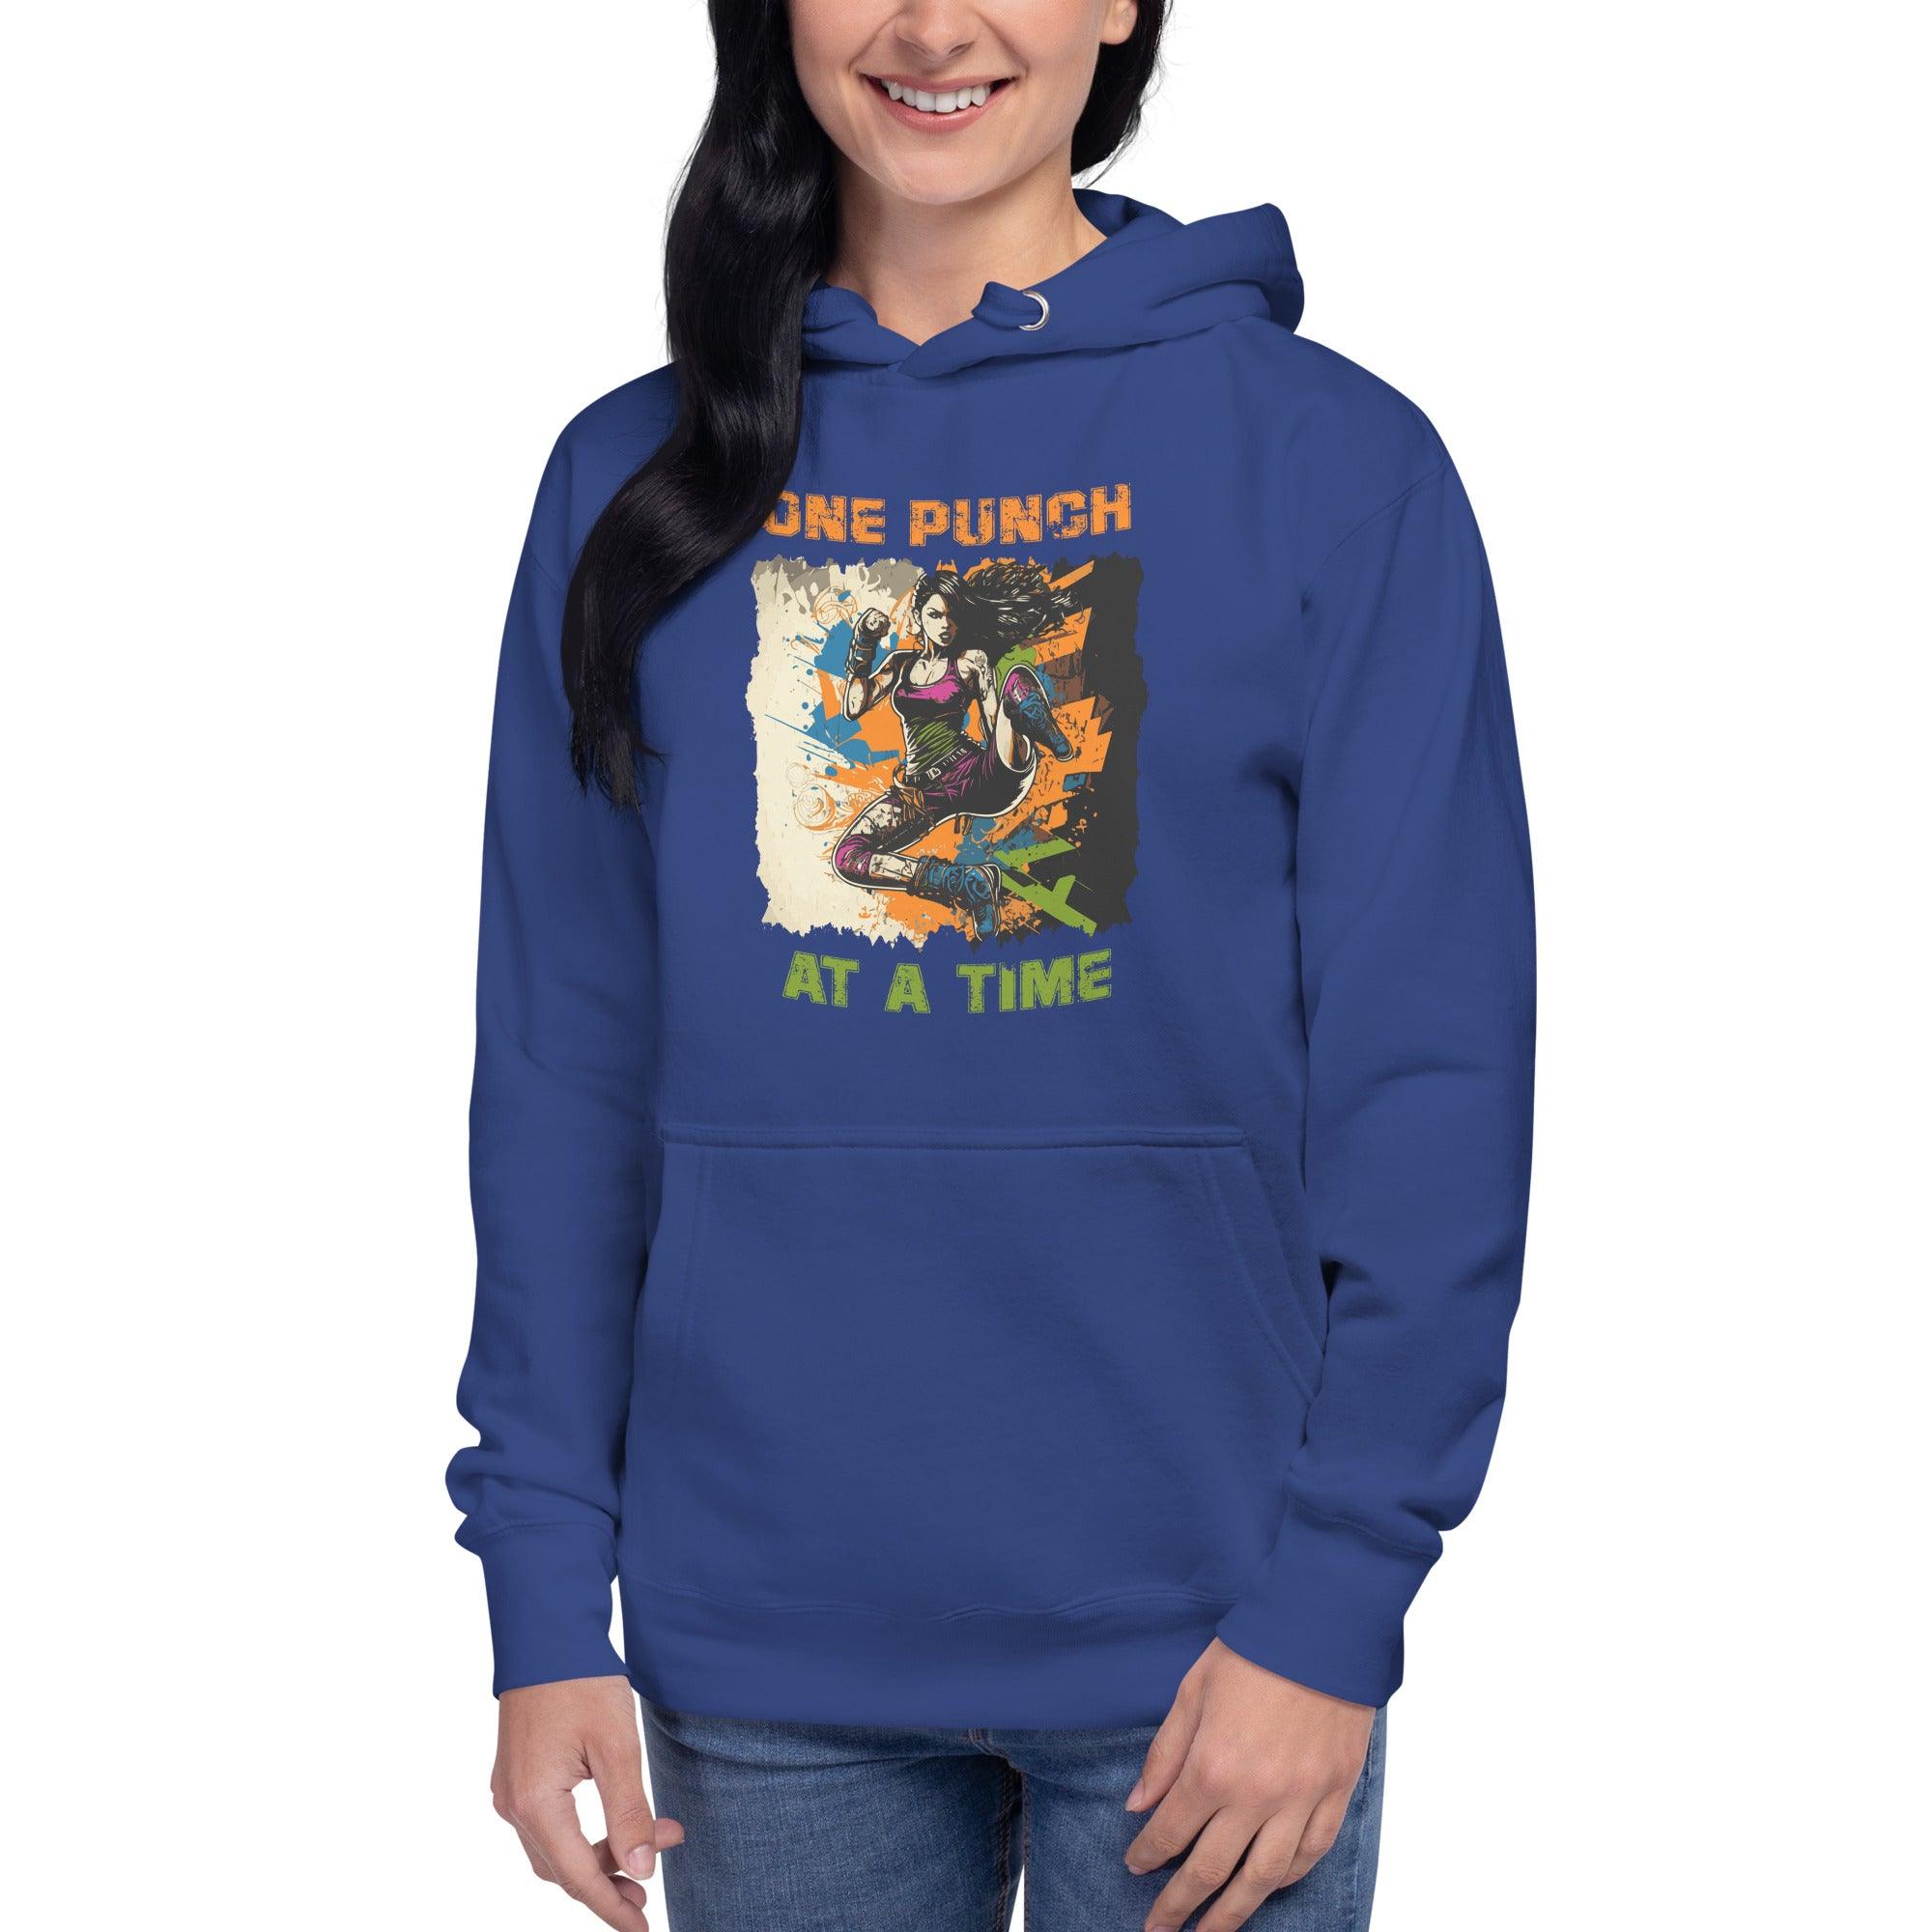 One Punch At A Time Unisex Hoodie - Beyond T-shirts